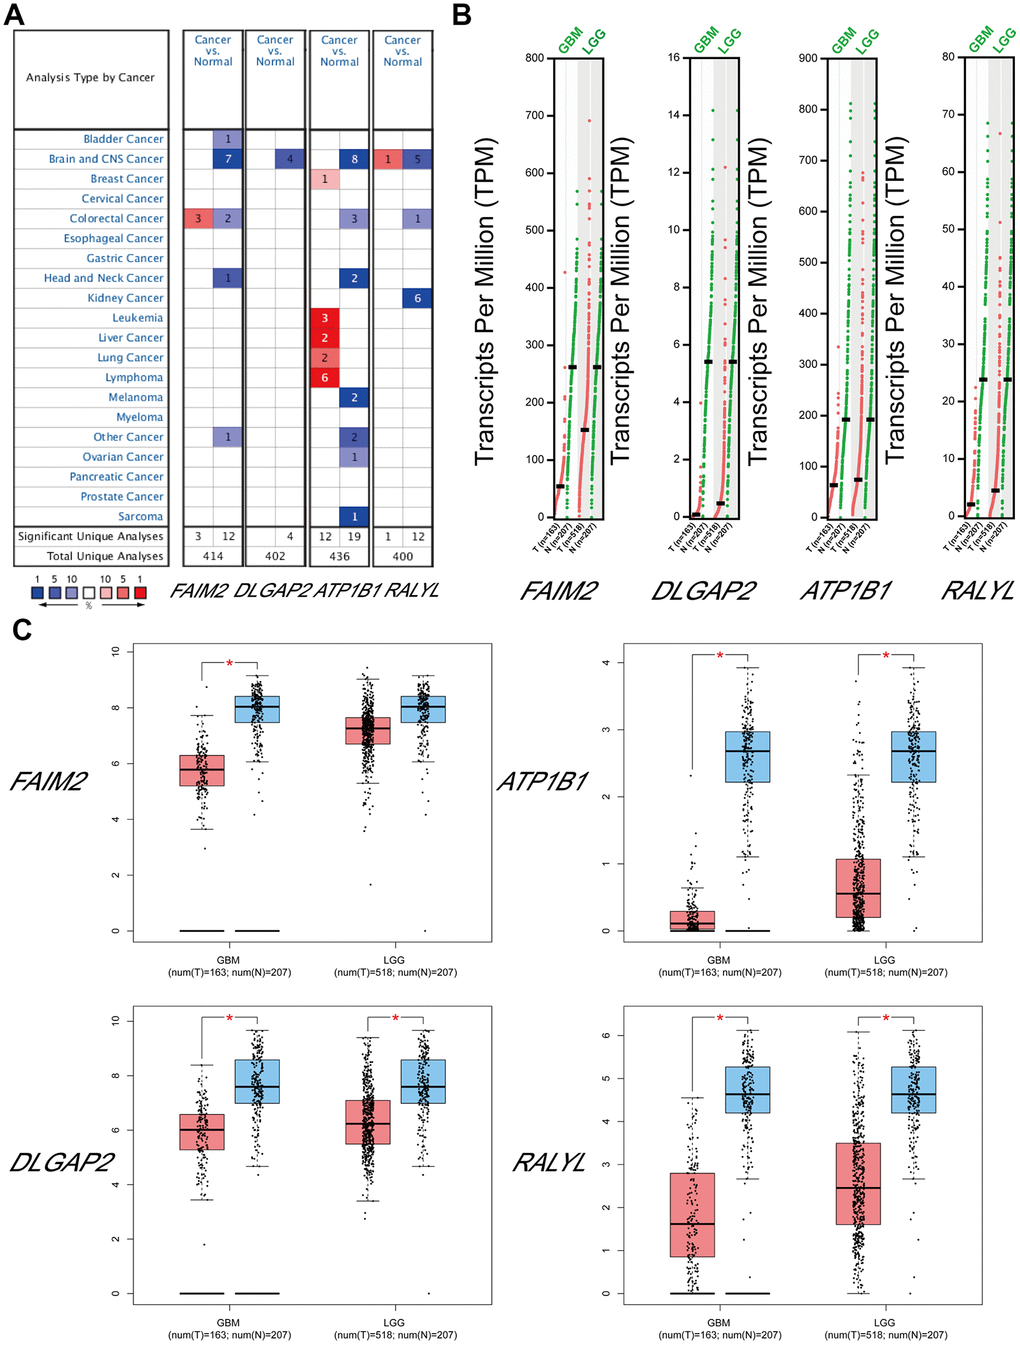 The expression levels of target mRNAs. (A) The expression levels of FAIM2, DLGAP2, ATP1B1 and RALYL in multiple cancers using ONCOMINE databases. (B, C) The expression levels of FAIM2, DLGAP2, ATP1B1 and RALYL in GBM and LGG using GEPIA databases.